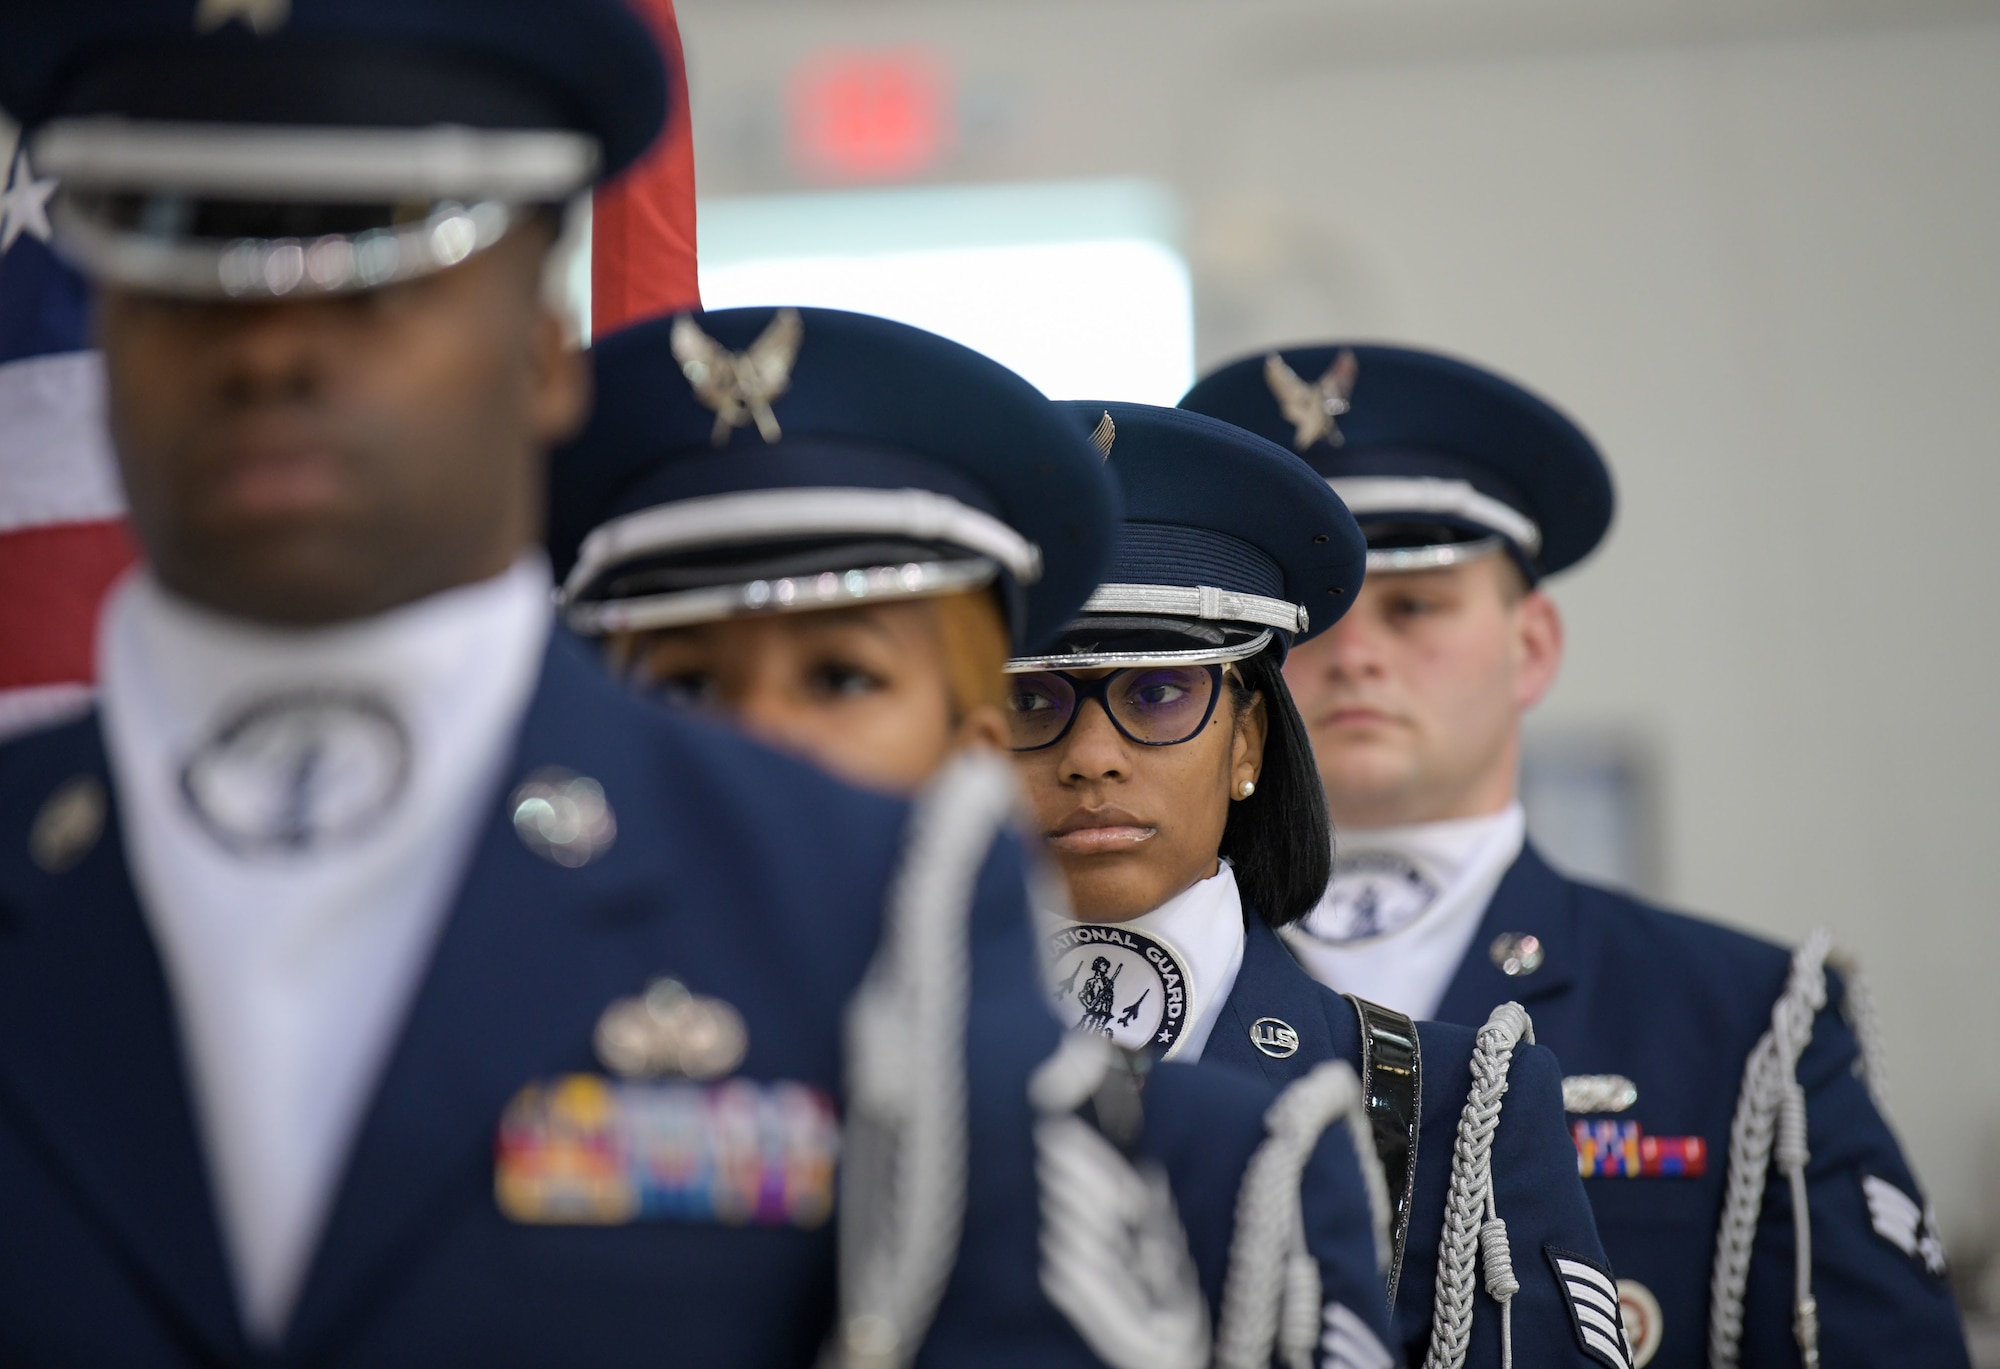 Airmen of the 172nd Airlift Wing Honor Guard stand ready to present the colors at the change of command ceremony at Thompson Field, Jackson, Mississippi, Feb. 6, 2022, welcoming Col. Britt A. Watson as the new wing commander of the 172nd.